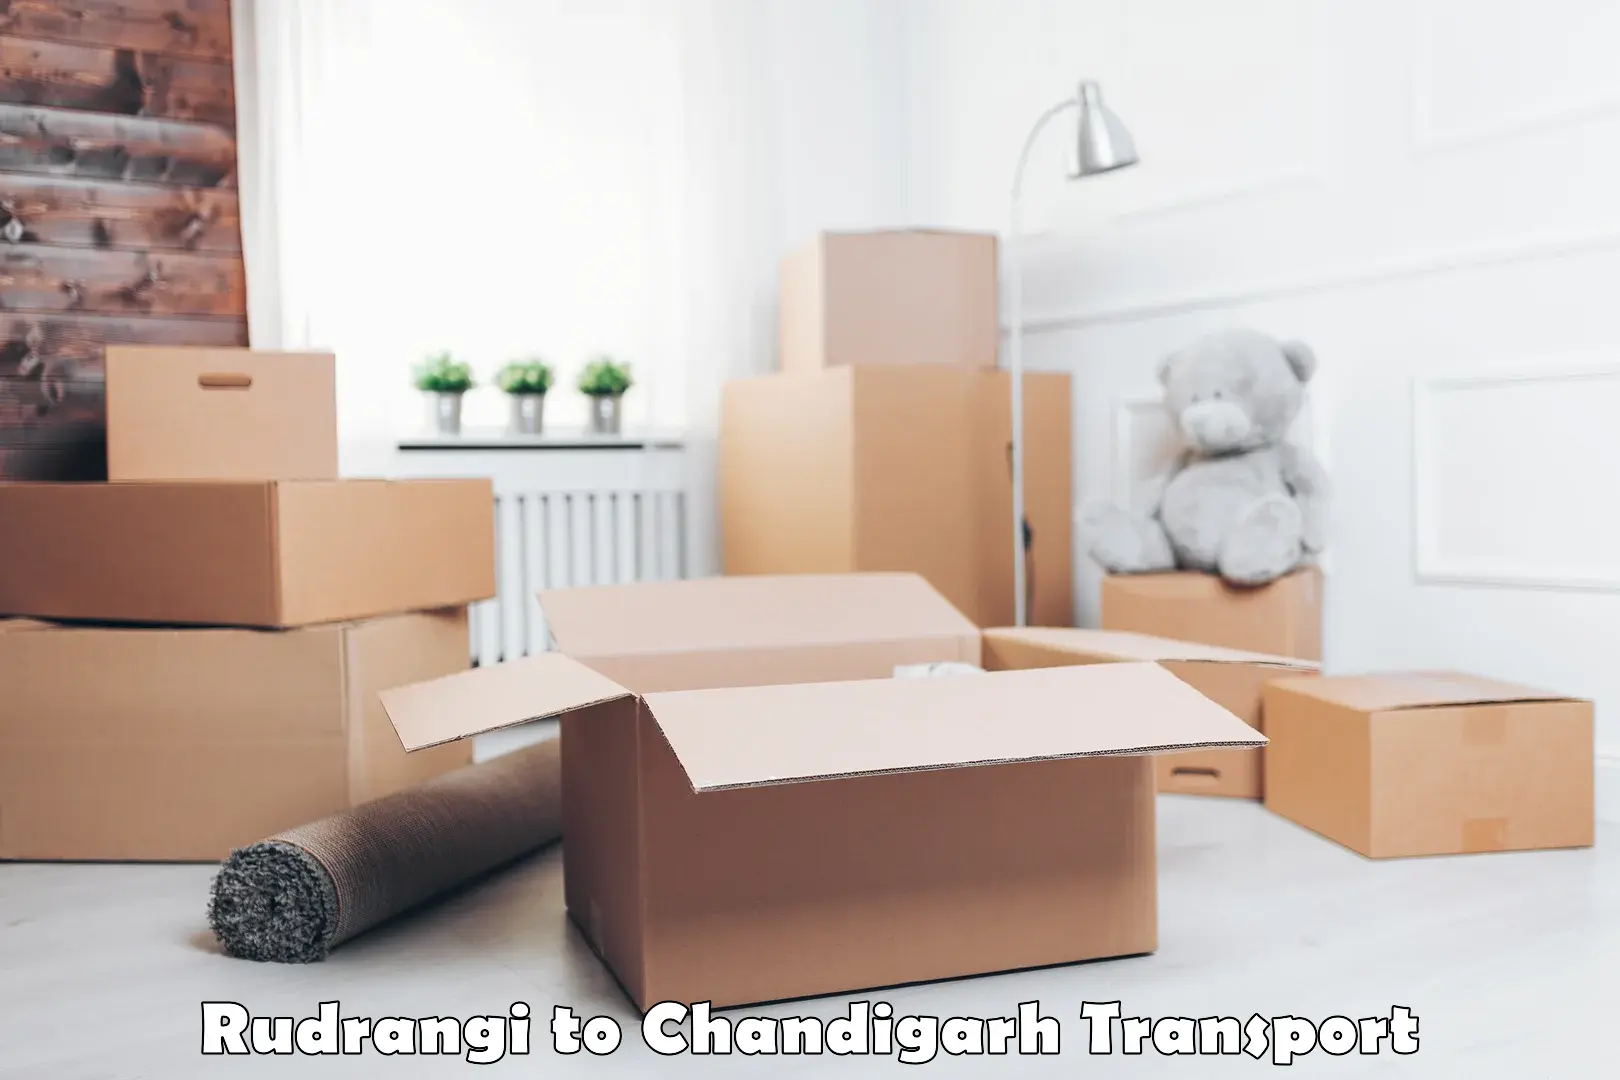 Transport shared services Rudrangi to Chandigarh